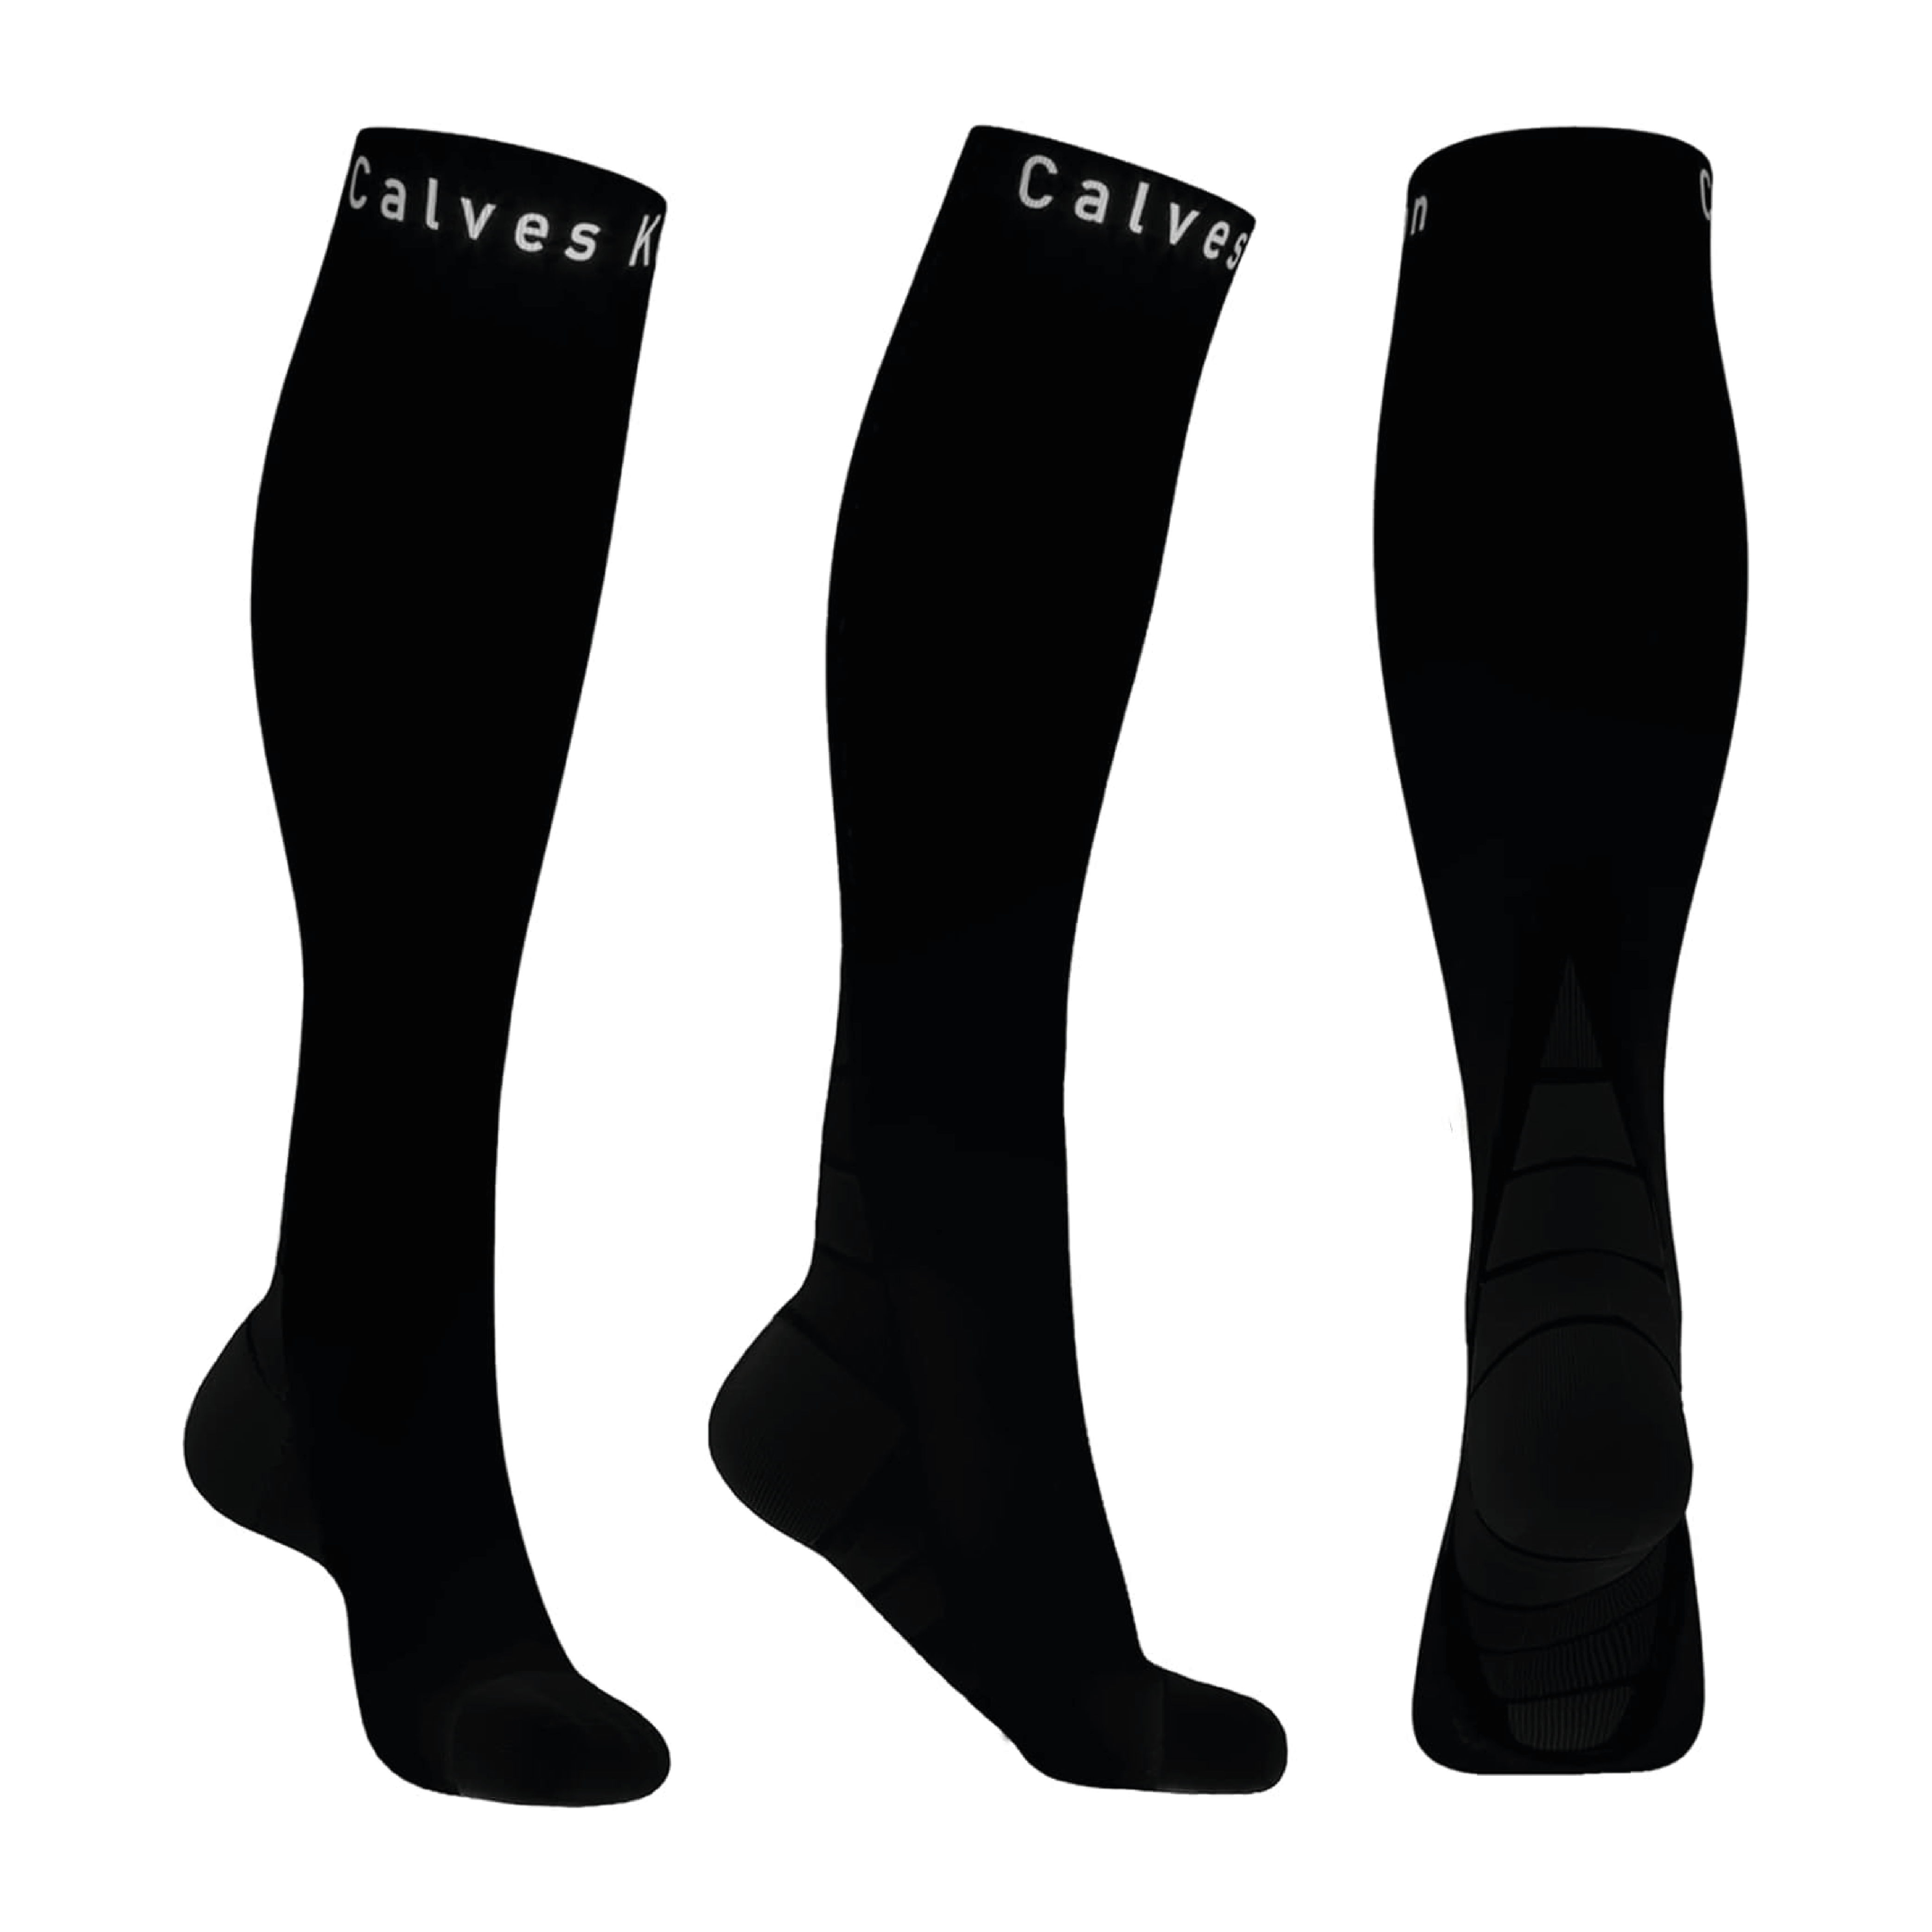 Compression socks/stockings designed for both men and women. They enhance recovery with the optimal graduated athletic fit, making them ideal for travel, running, nursing, addressing shin splints, flight discomfort, and maternity pregnancy. Elevate stamina and improve circulation for an overall enhanced experience.